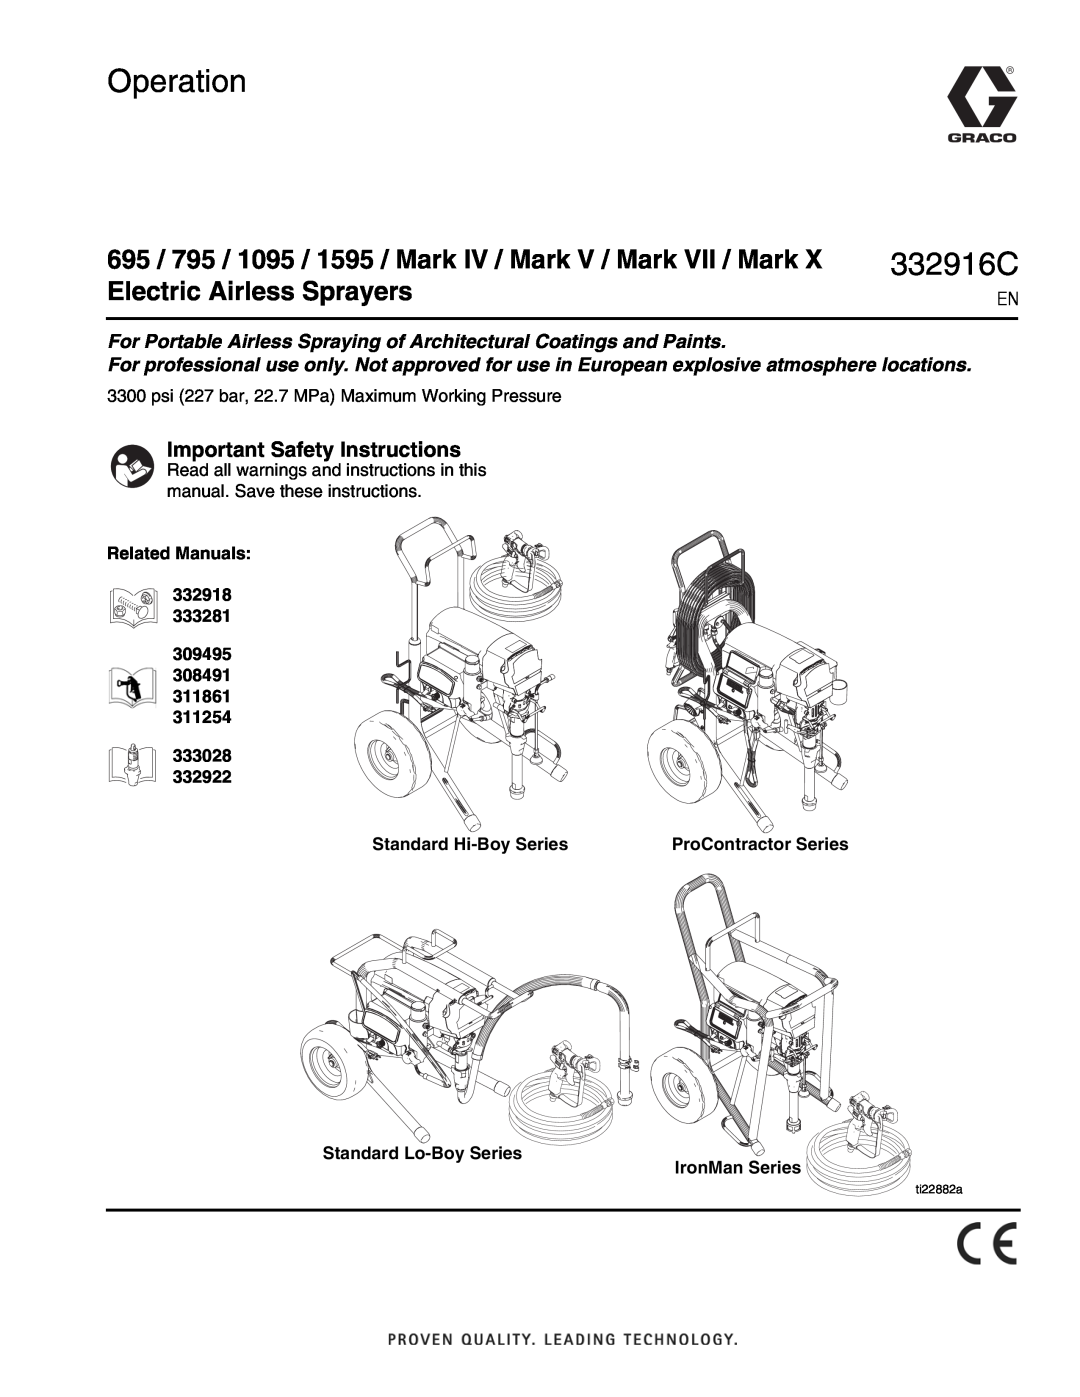 Graco Mark VII important safety instructions 332916C, Important Safety Instructions, 332922, Standard Hi-Boy Series, 695 